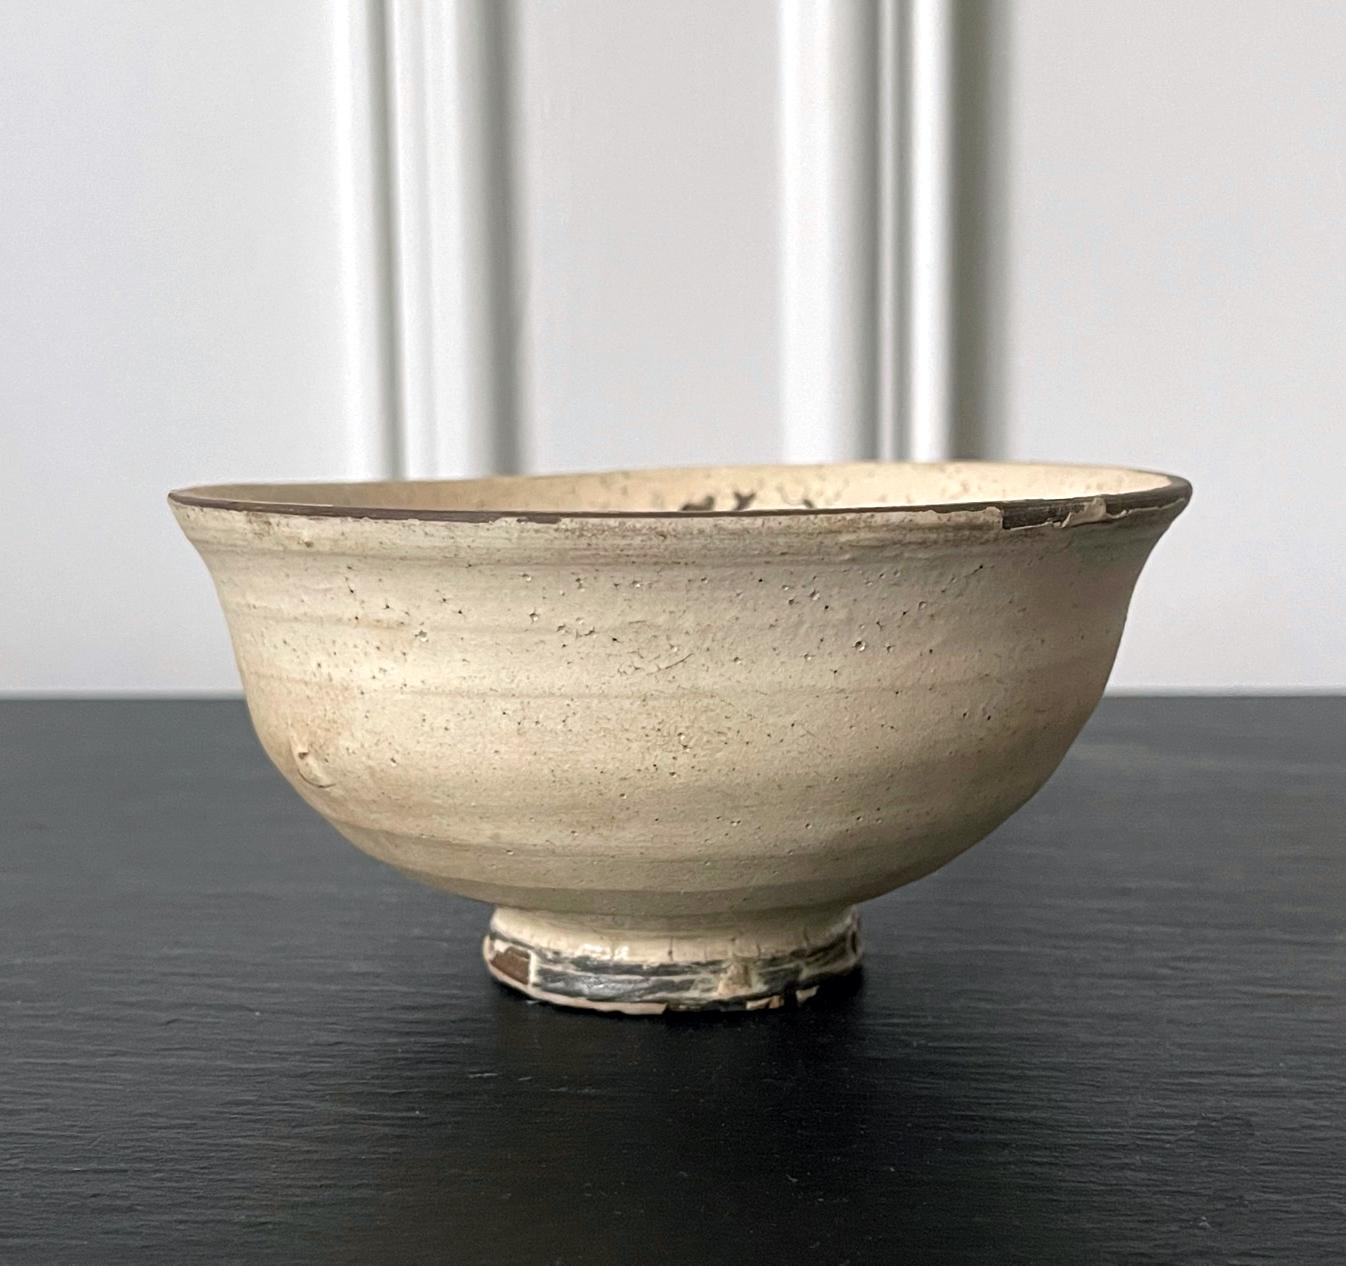 A ceramic tea bowl with milky white glaze made in Korea for Japanese market circa 16-17th century. 
The thinly potted bowl is in the shape called Hatazori-gata (curving-lip type) that is known as Komogai (or Kumagawa) type. It was named after the